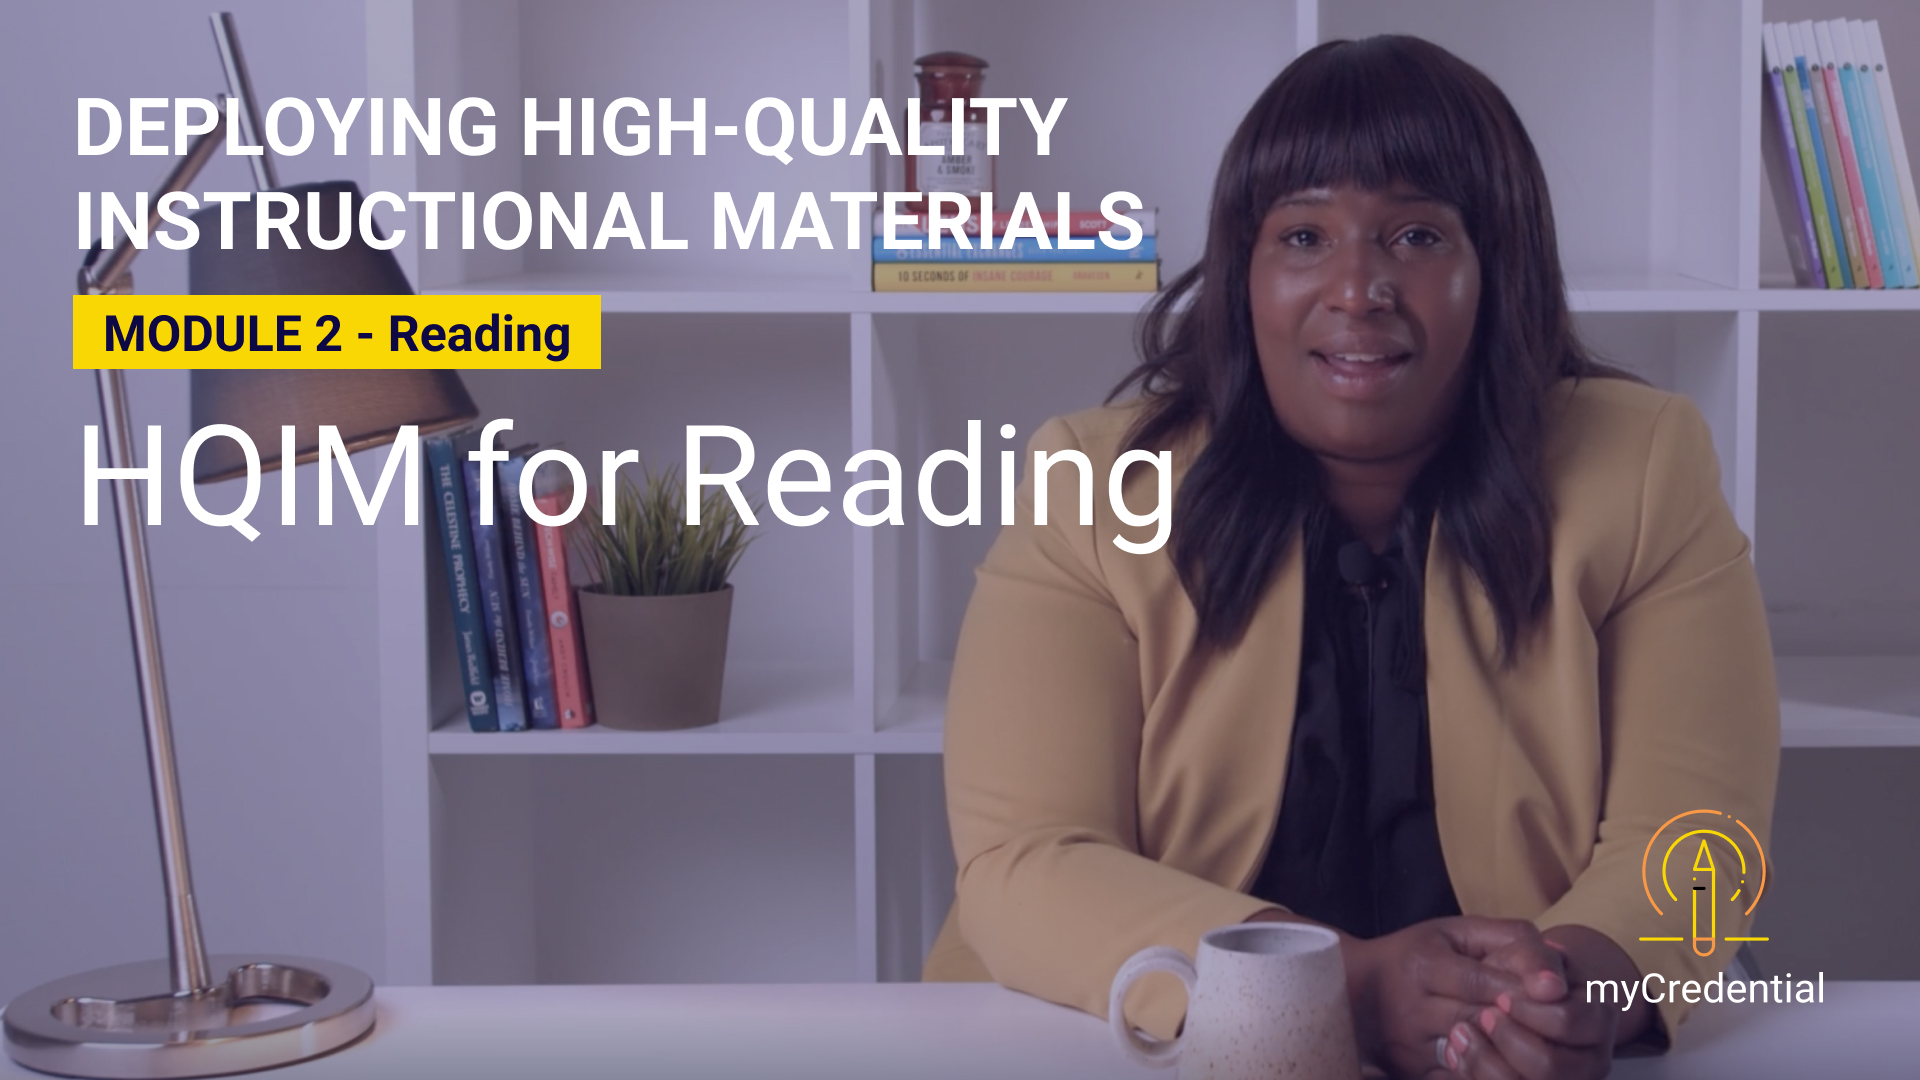 Deploying High-Quality Instructional Materials (Module 2b): HQIM for Reading